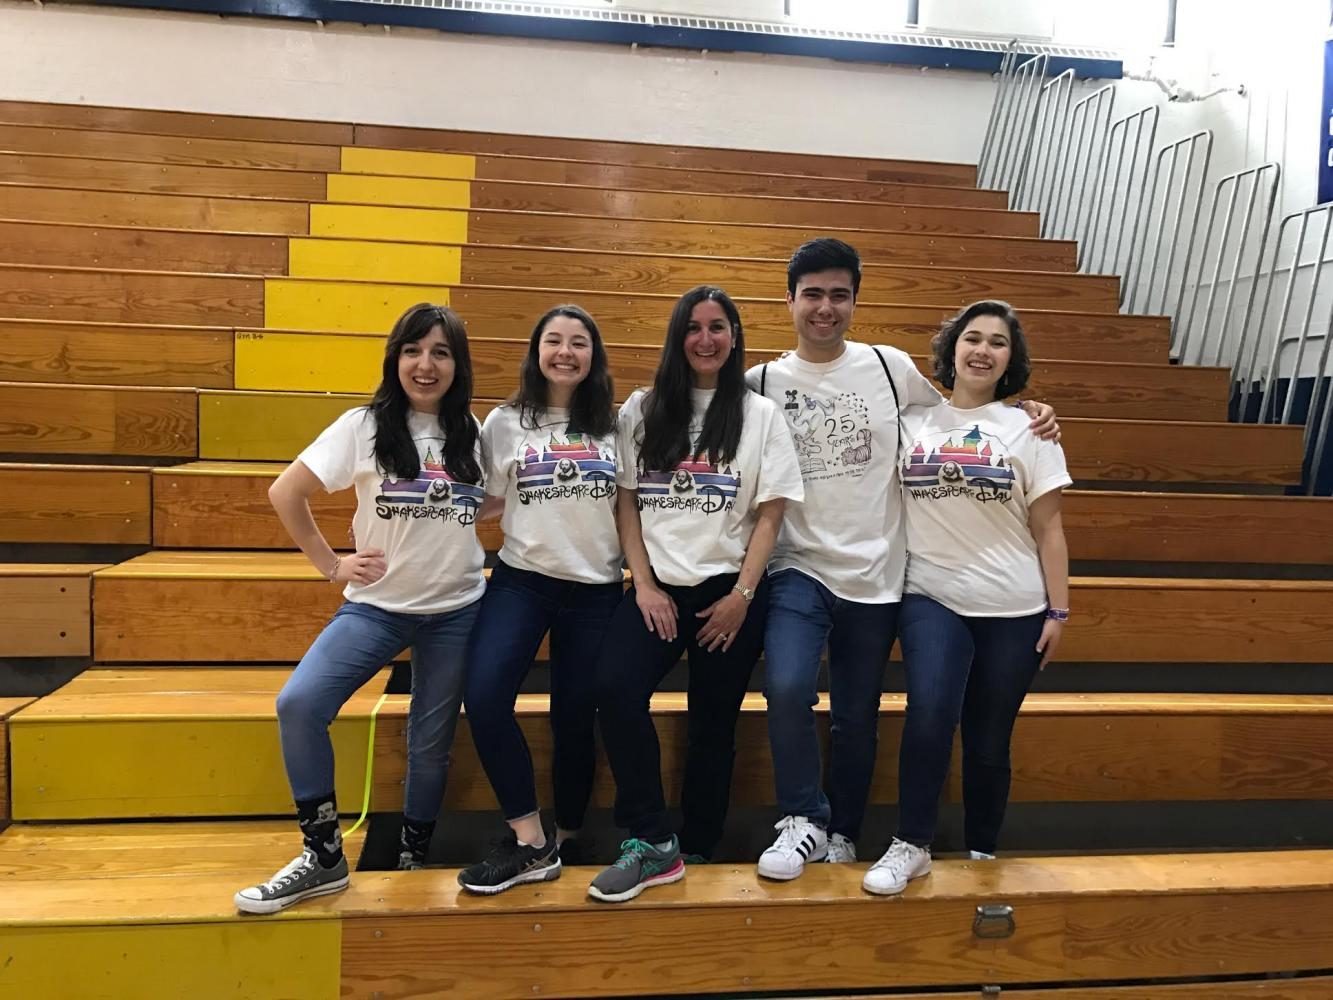 Senior+coordinators+Sarah+DeMarino%2C+Emilia+Charno%2C+Christian+Hill%2C+and+Anna+Cohen+have+helped+to+coordinate+the+past+two+Shakespeare+Days+with+Ms.+Valenti.